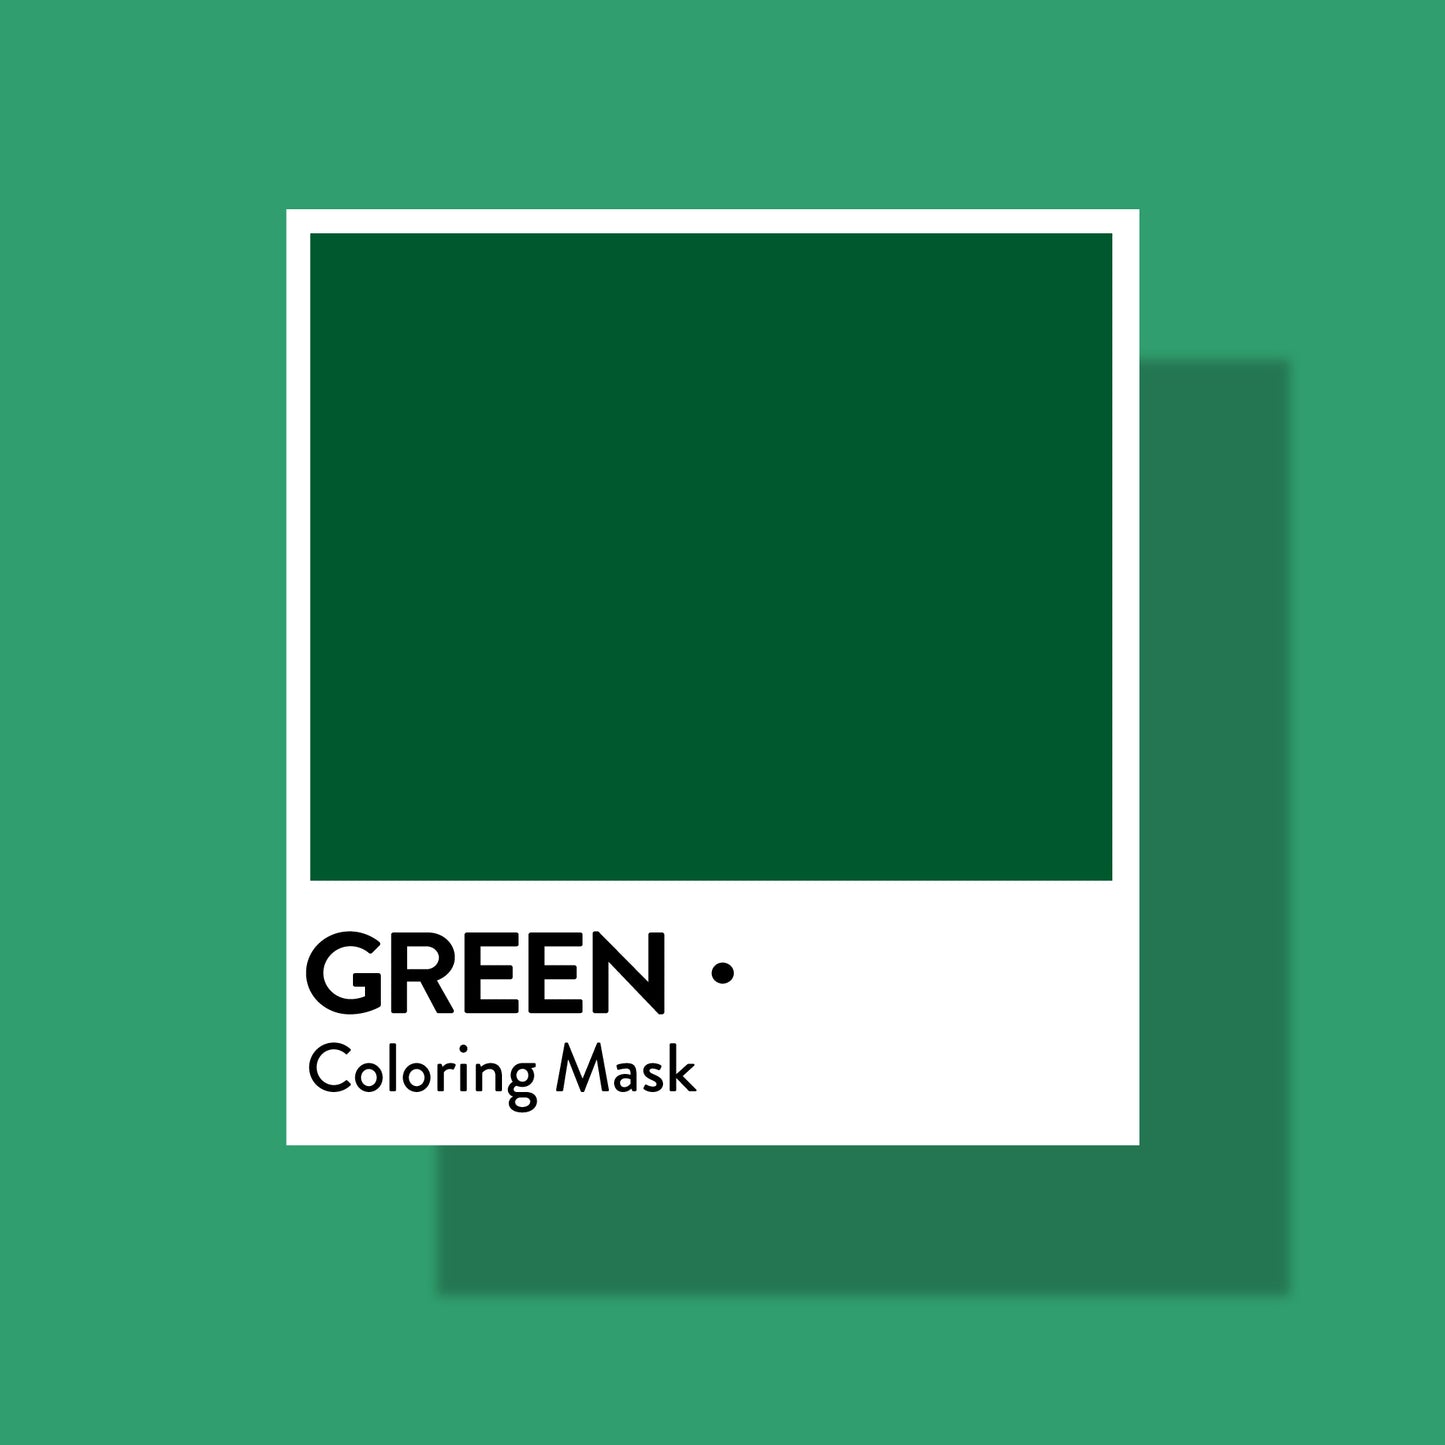 RETAIL COLOREFRESH GREEN COLORING MASK